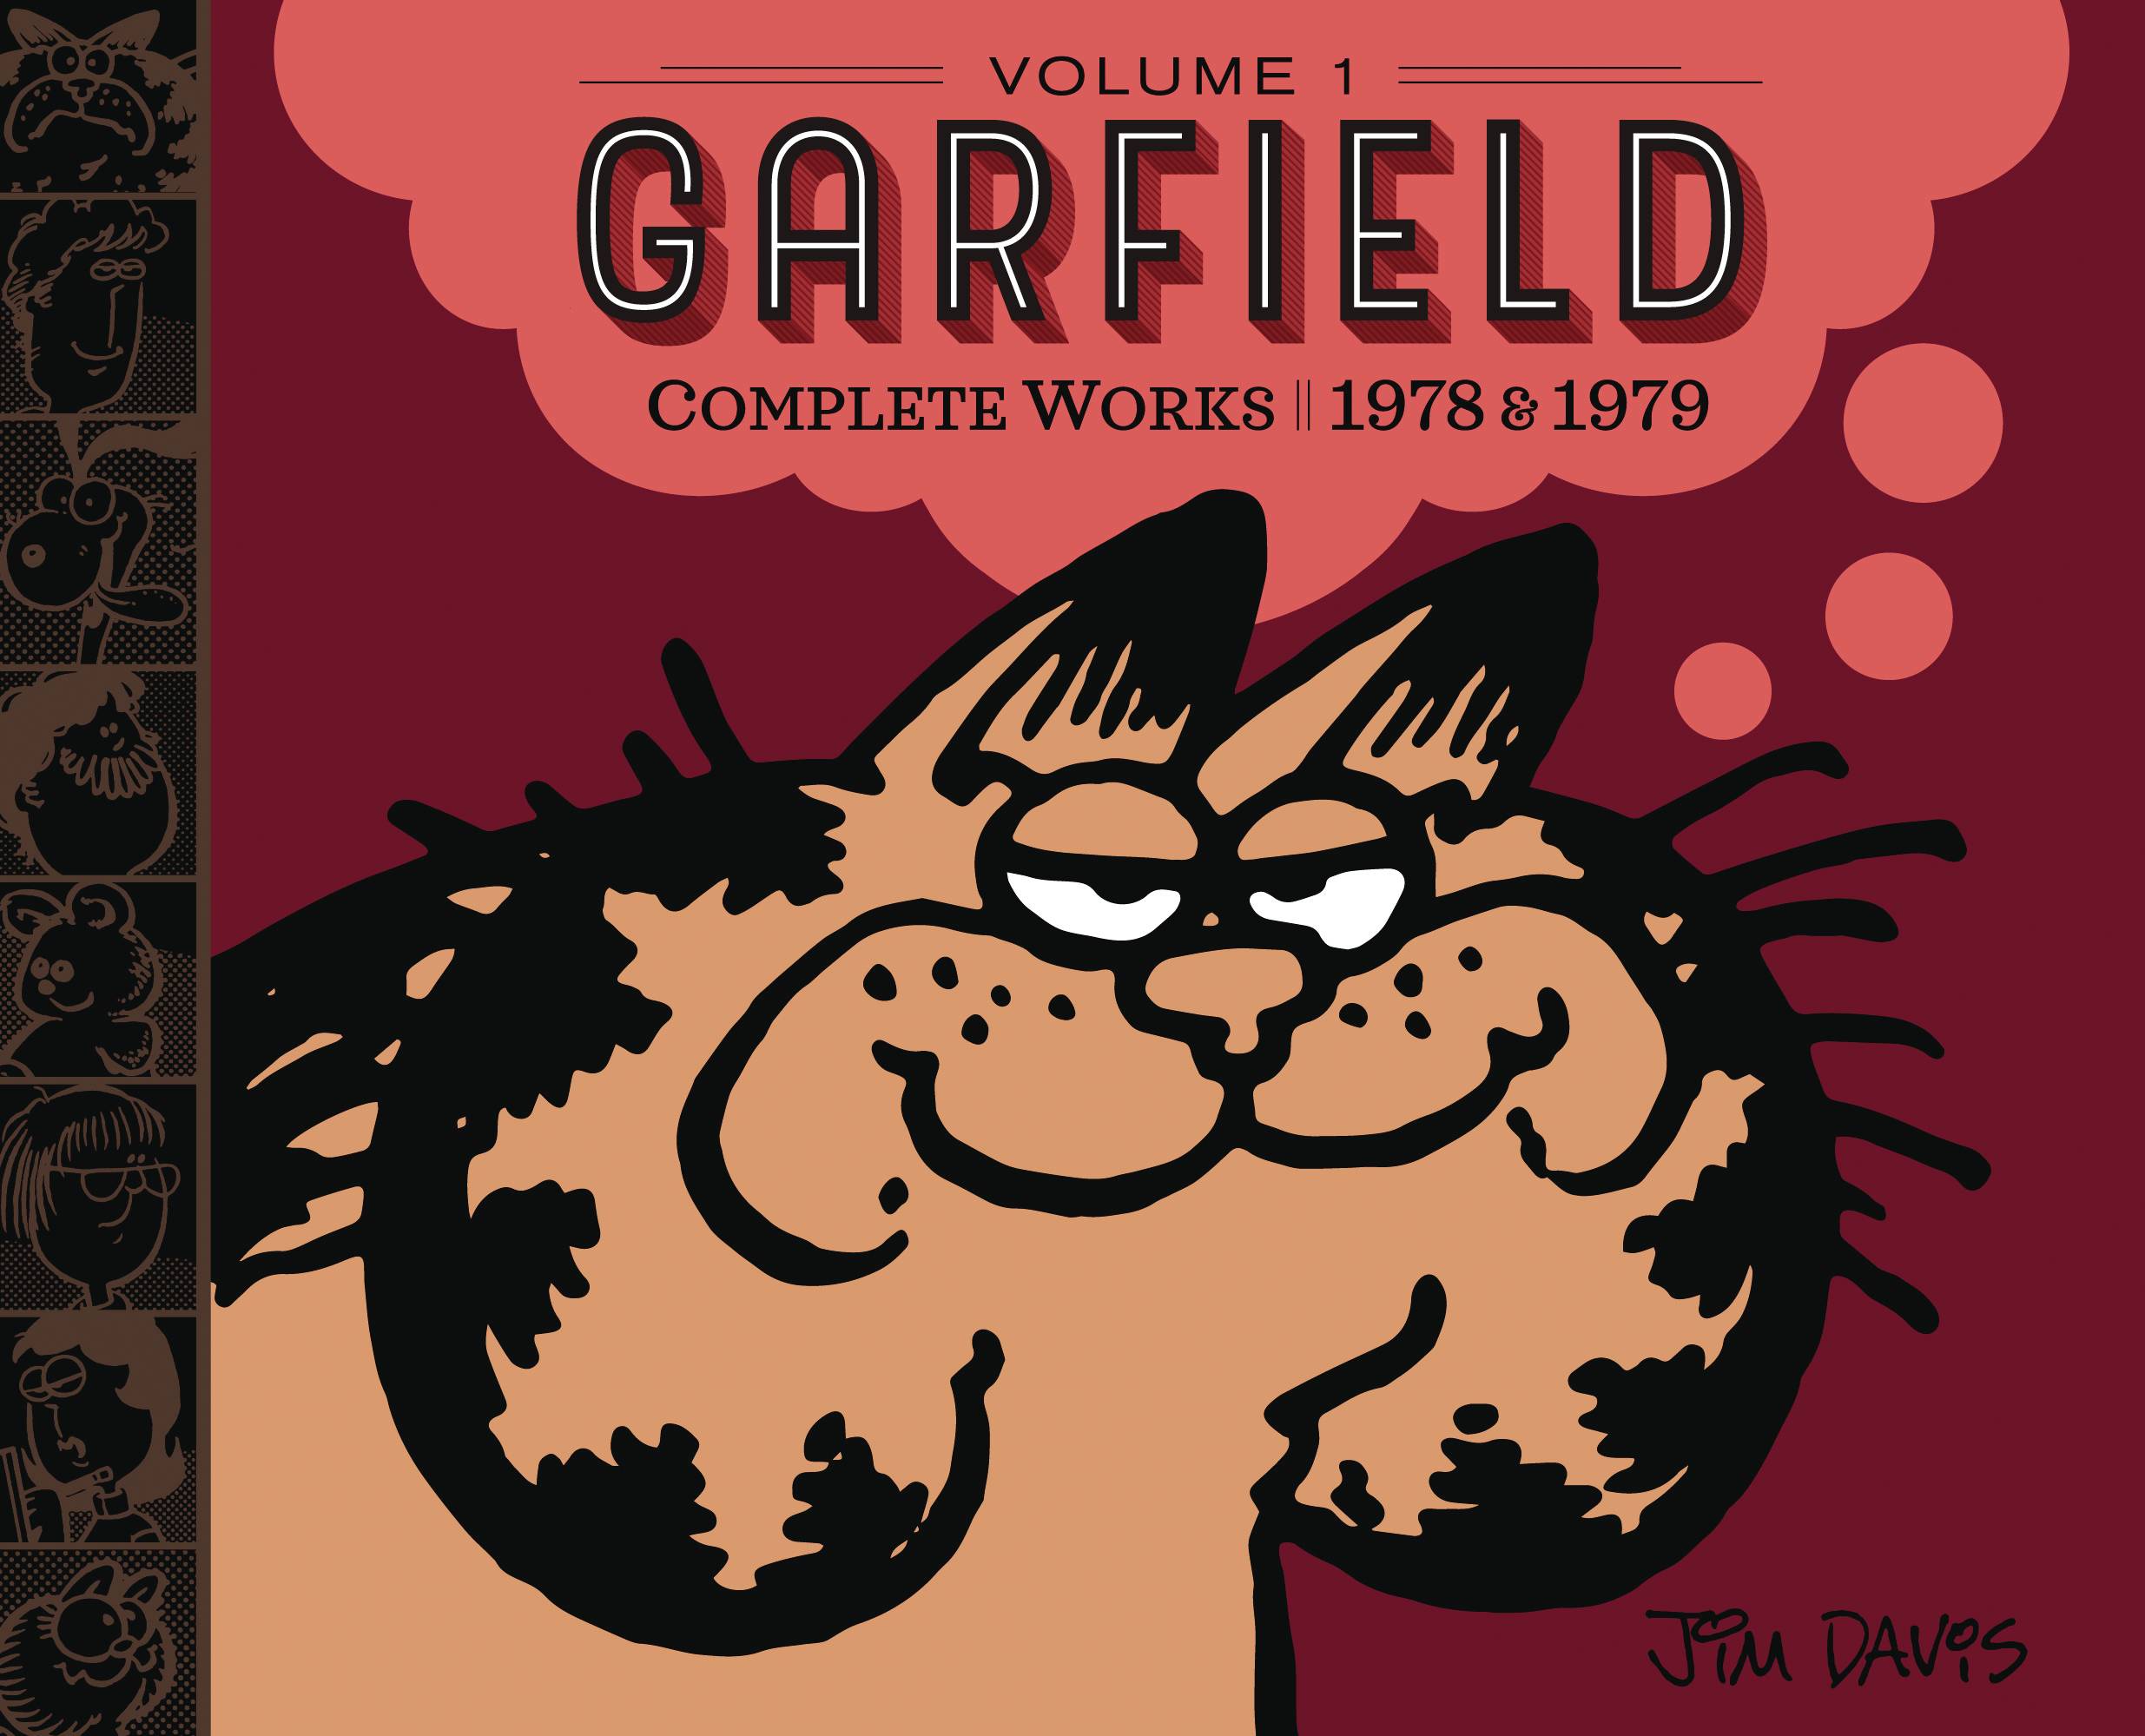 Garfield Complete Works Hardcover Graphic Novel Volume 1 1978-1979